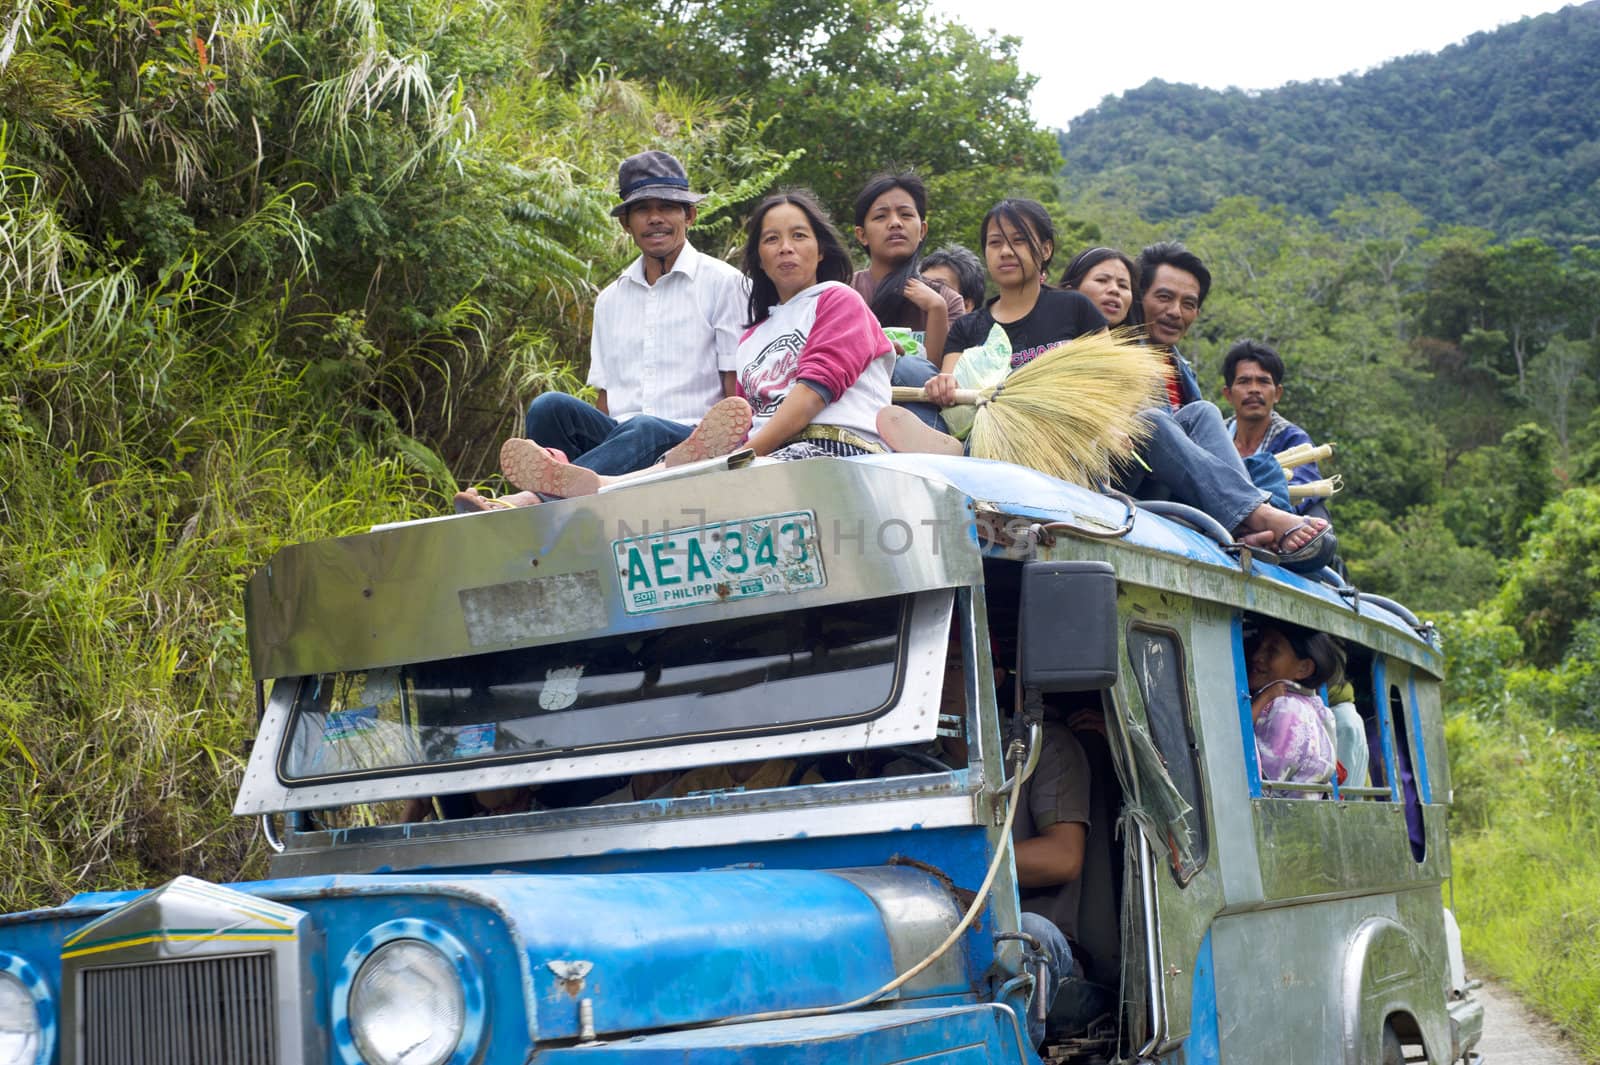 Bontoc, Philippines - March 26, 2012:  Passengers sit atop a very full jeepney The jeepney found everywhere in the country. It carries between 16 to 30 passengers.